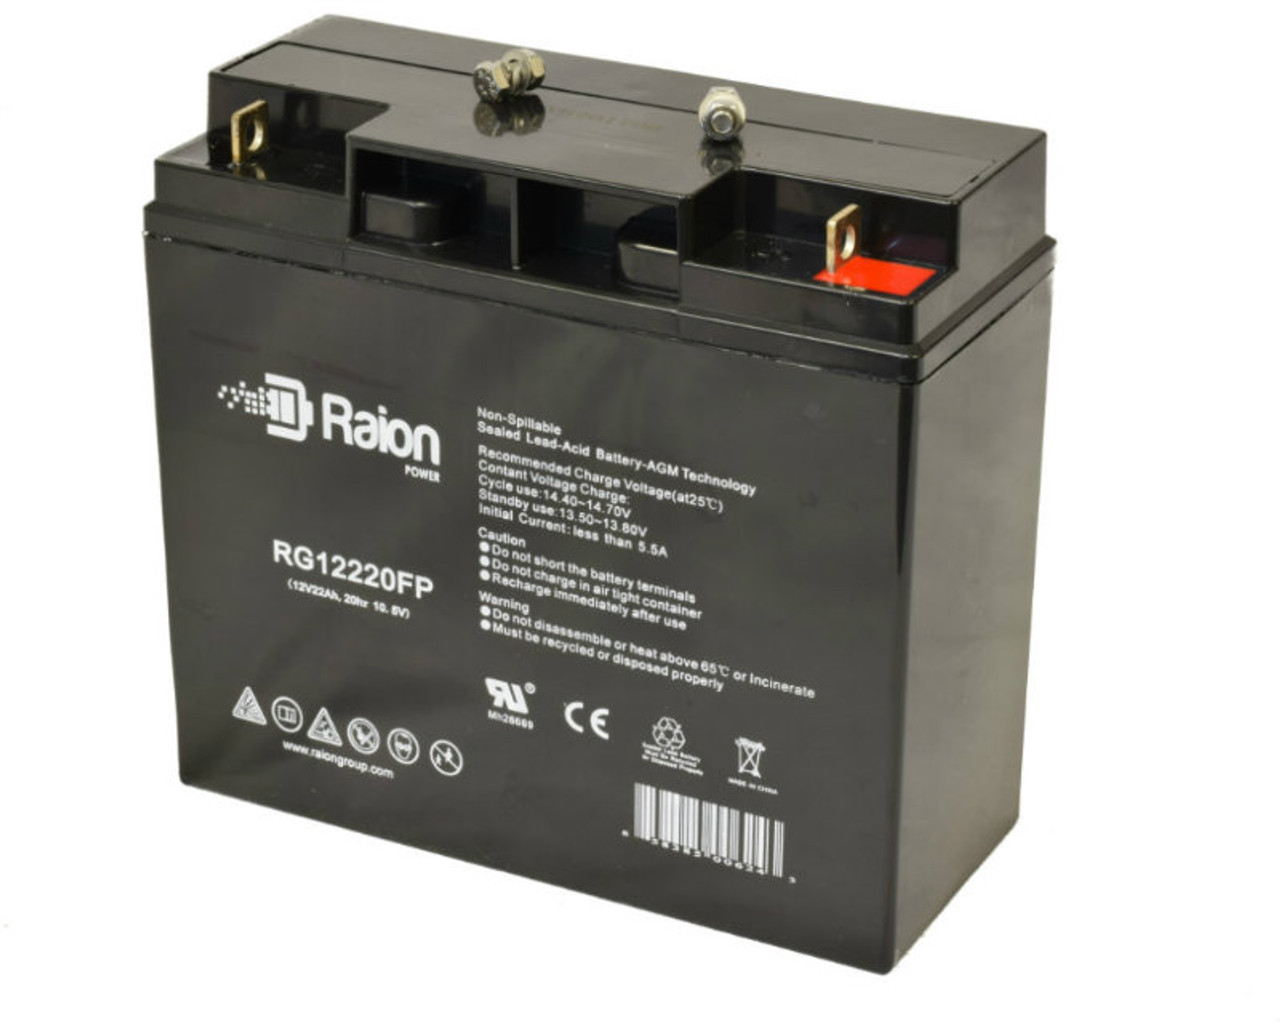 Raion Power Replacement RG12220FP Battery for Black & Decker 905080-11 Lawn Mower